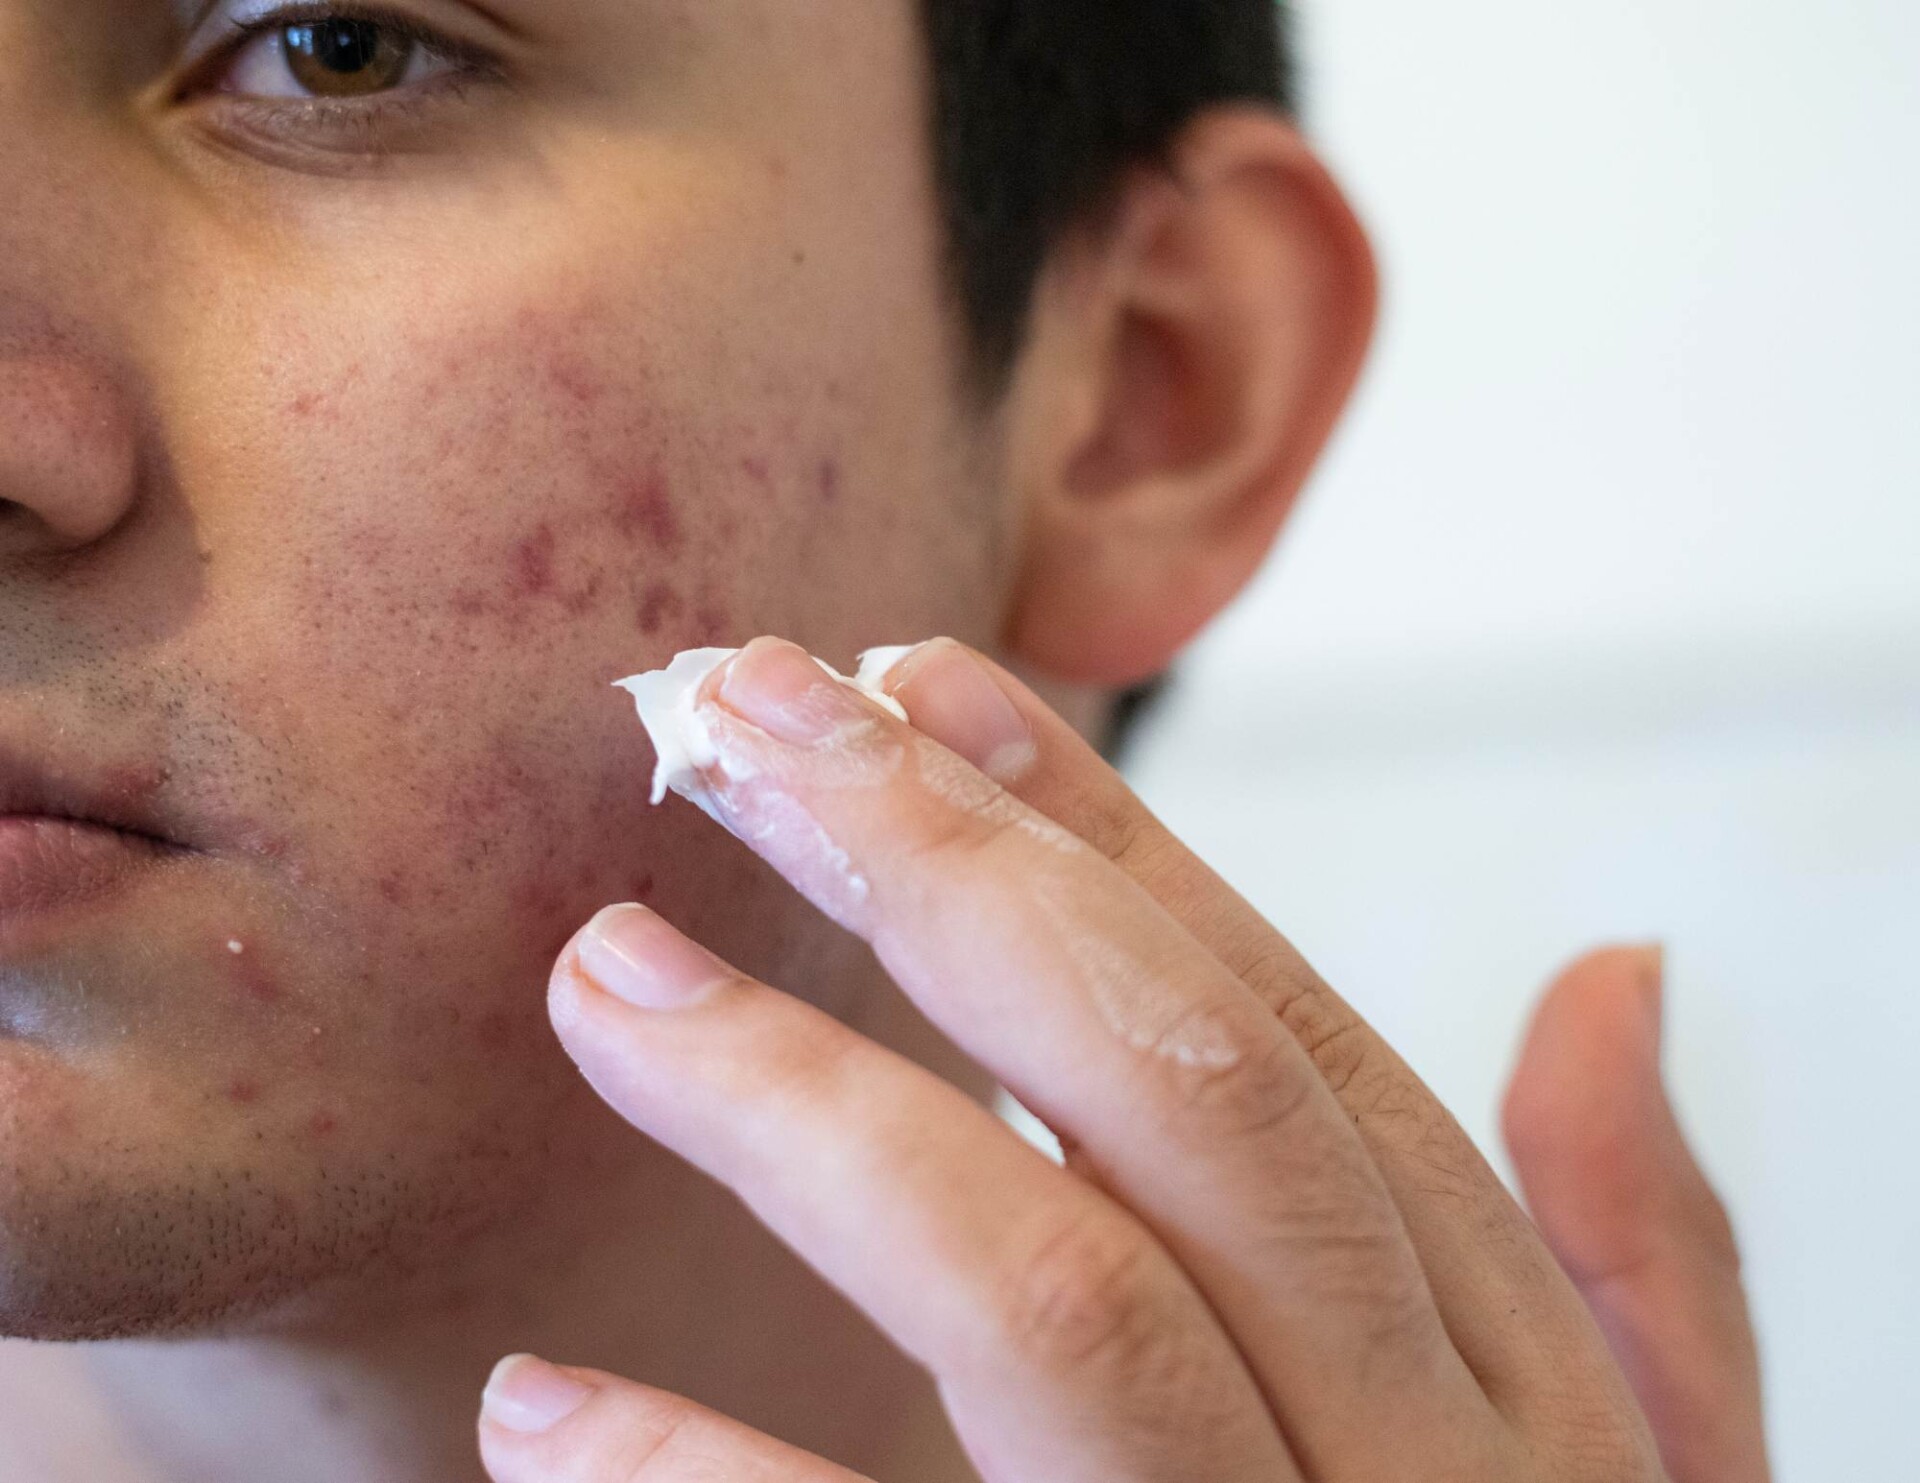 A close-up image of a person applying a cream to their cheek, which is affected by acne. The individual's skin shows redness and inflamed acne lesions. The person is using their fingers to apply the treatment, focusing on the affected areas.